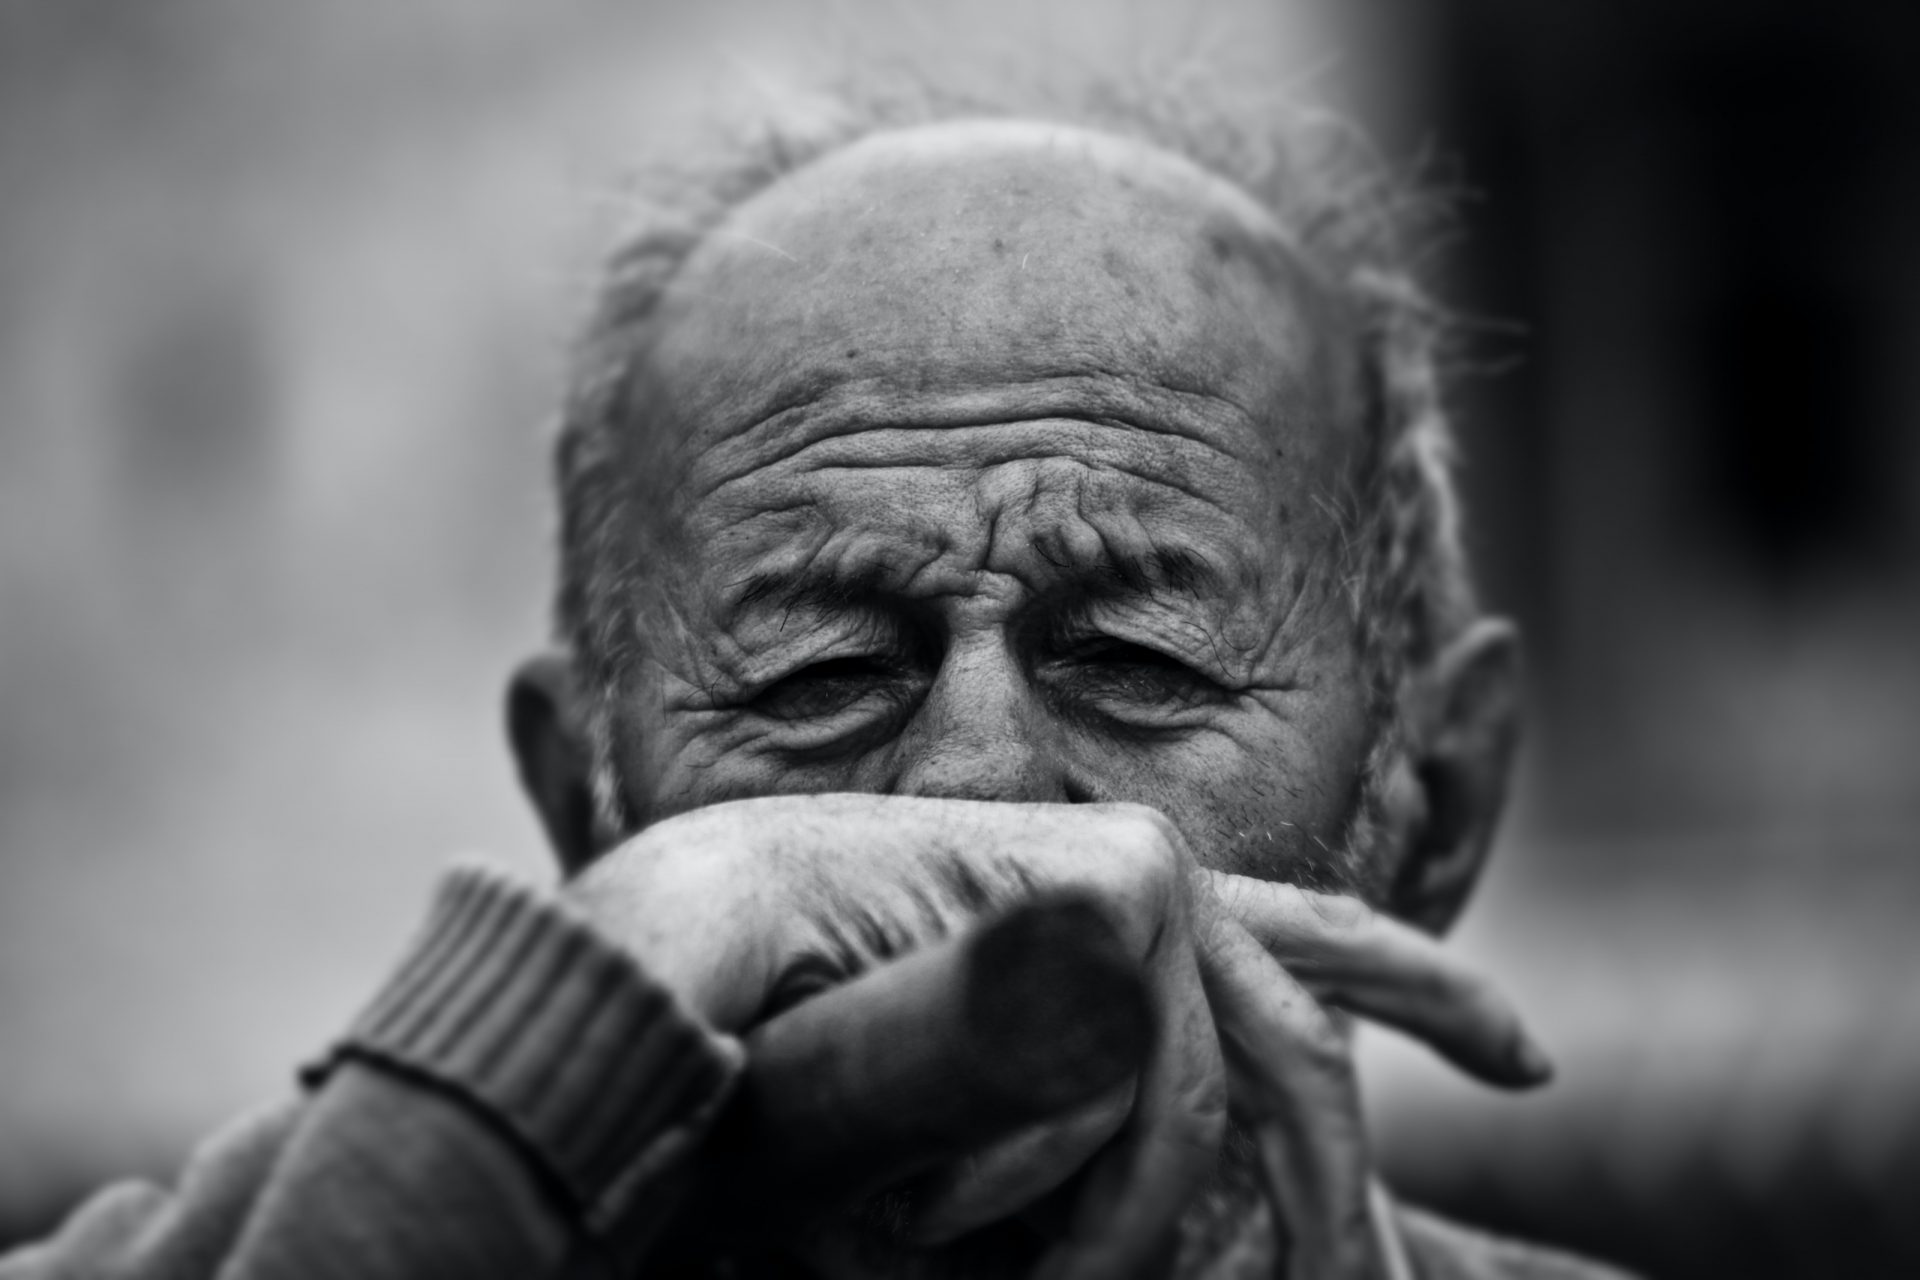 Elderly man with his hand covering his mouth in obvious discomfort.